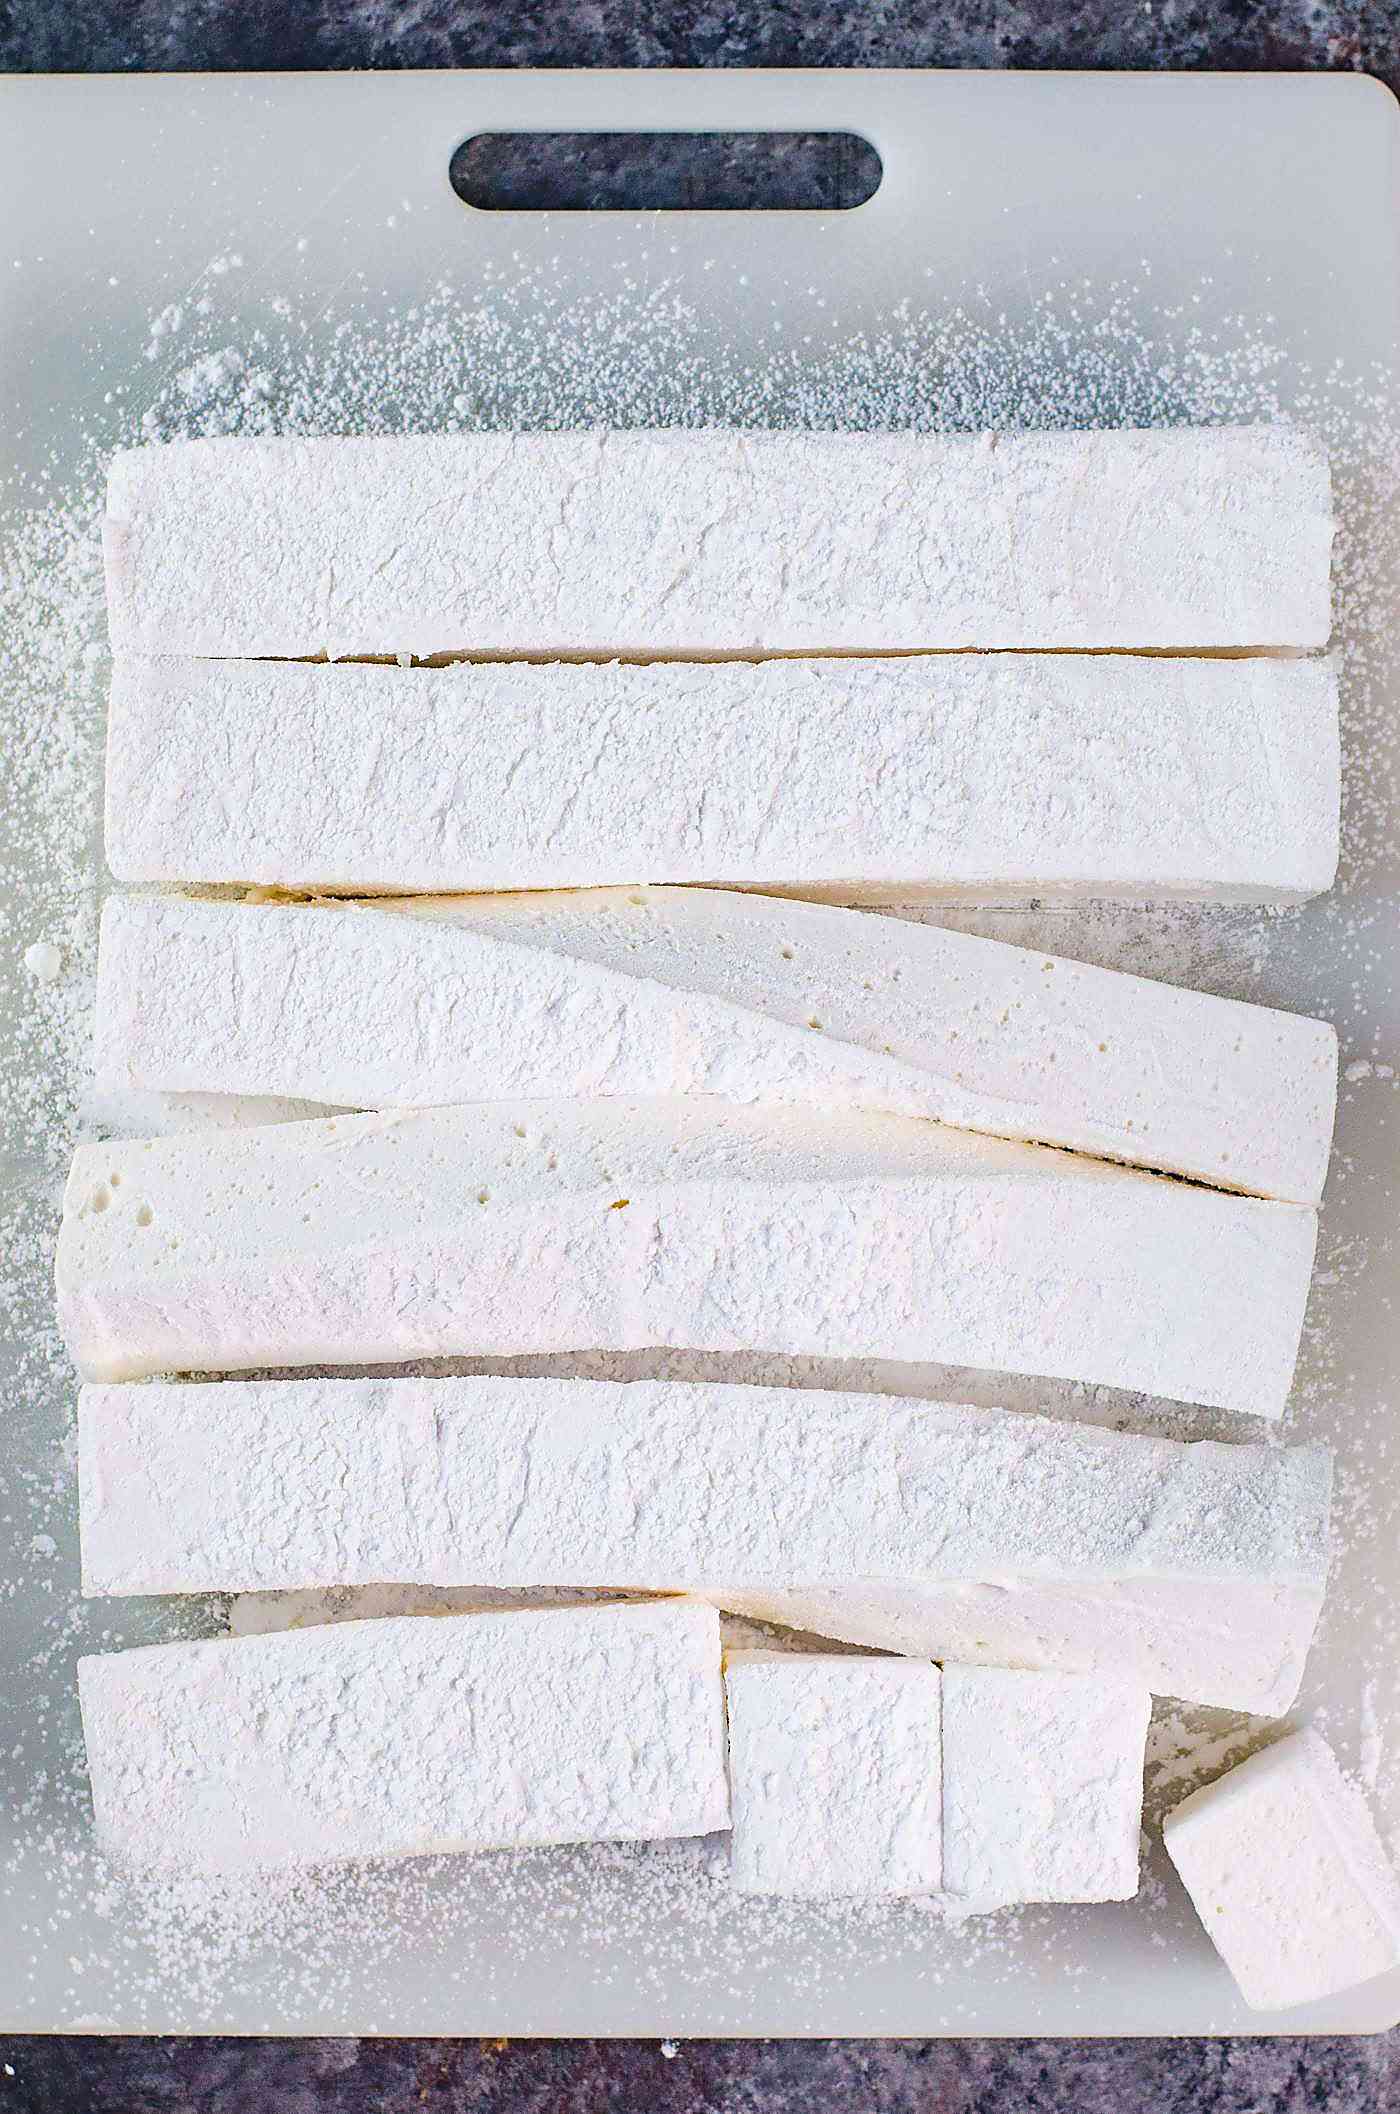 How to make Marshmallows - Learn the art of making fluffy, soft homemade marshmallows with or without corn syrup! With tips and information to make the perfect Marshmallows in many flavors. 